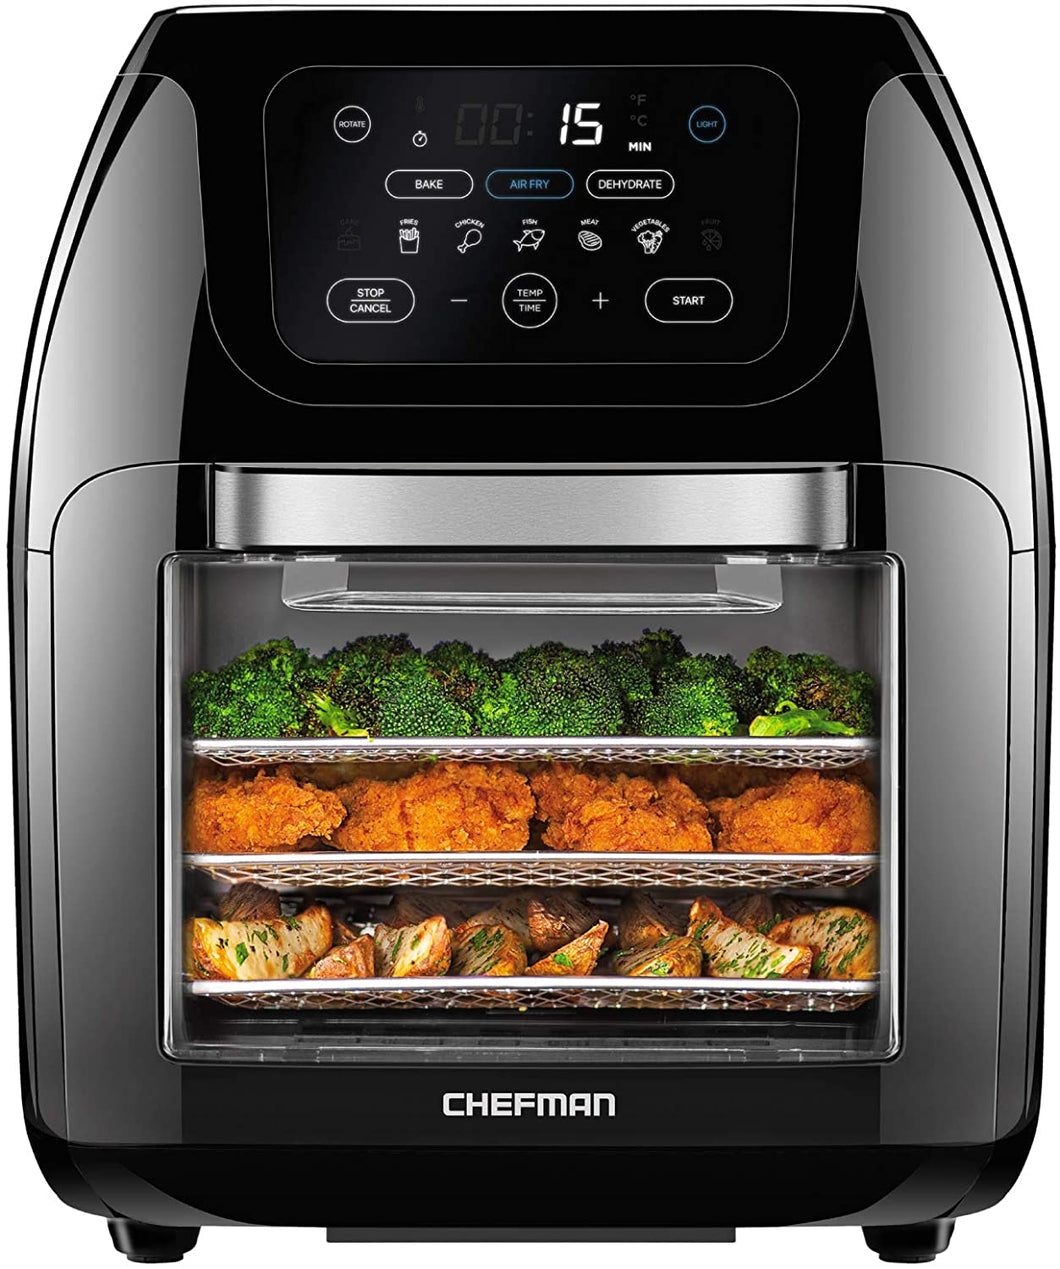 CHEFMAN  Air Fryer Oven with Rotisserie - Refurbished with Home Essentials Warranty - RJ3810RDOV2